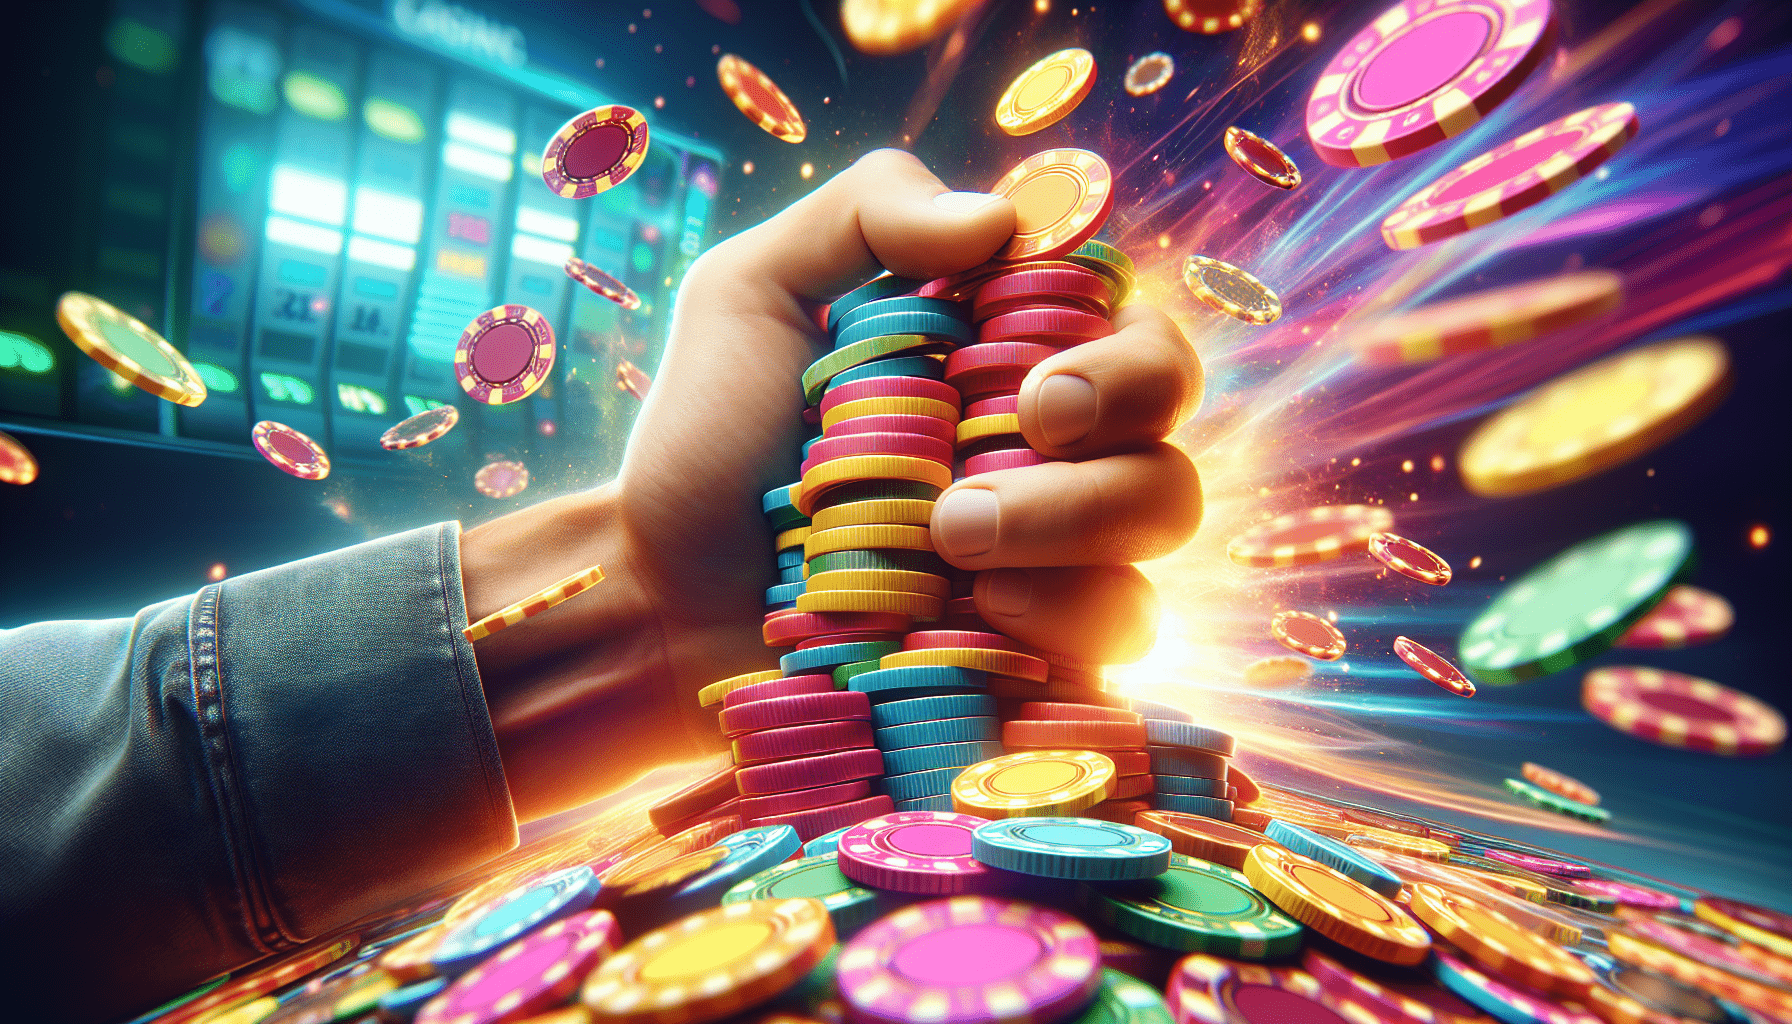 Does Spin Casino Pay Out?